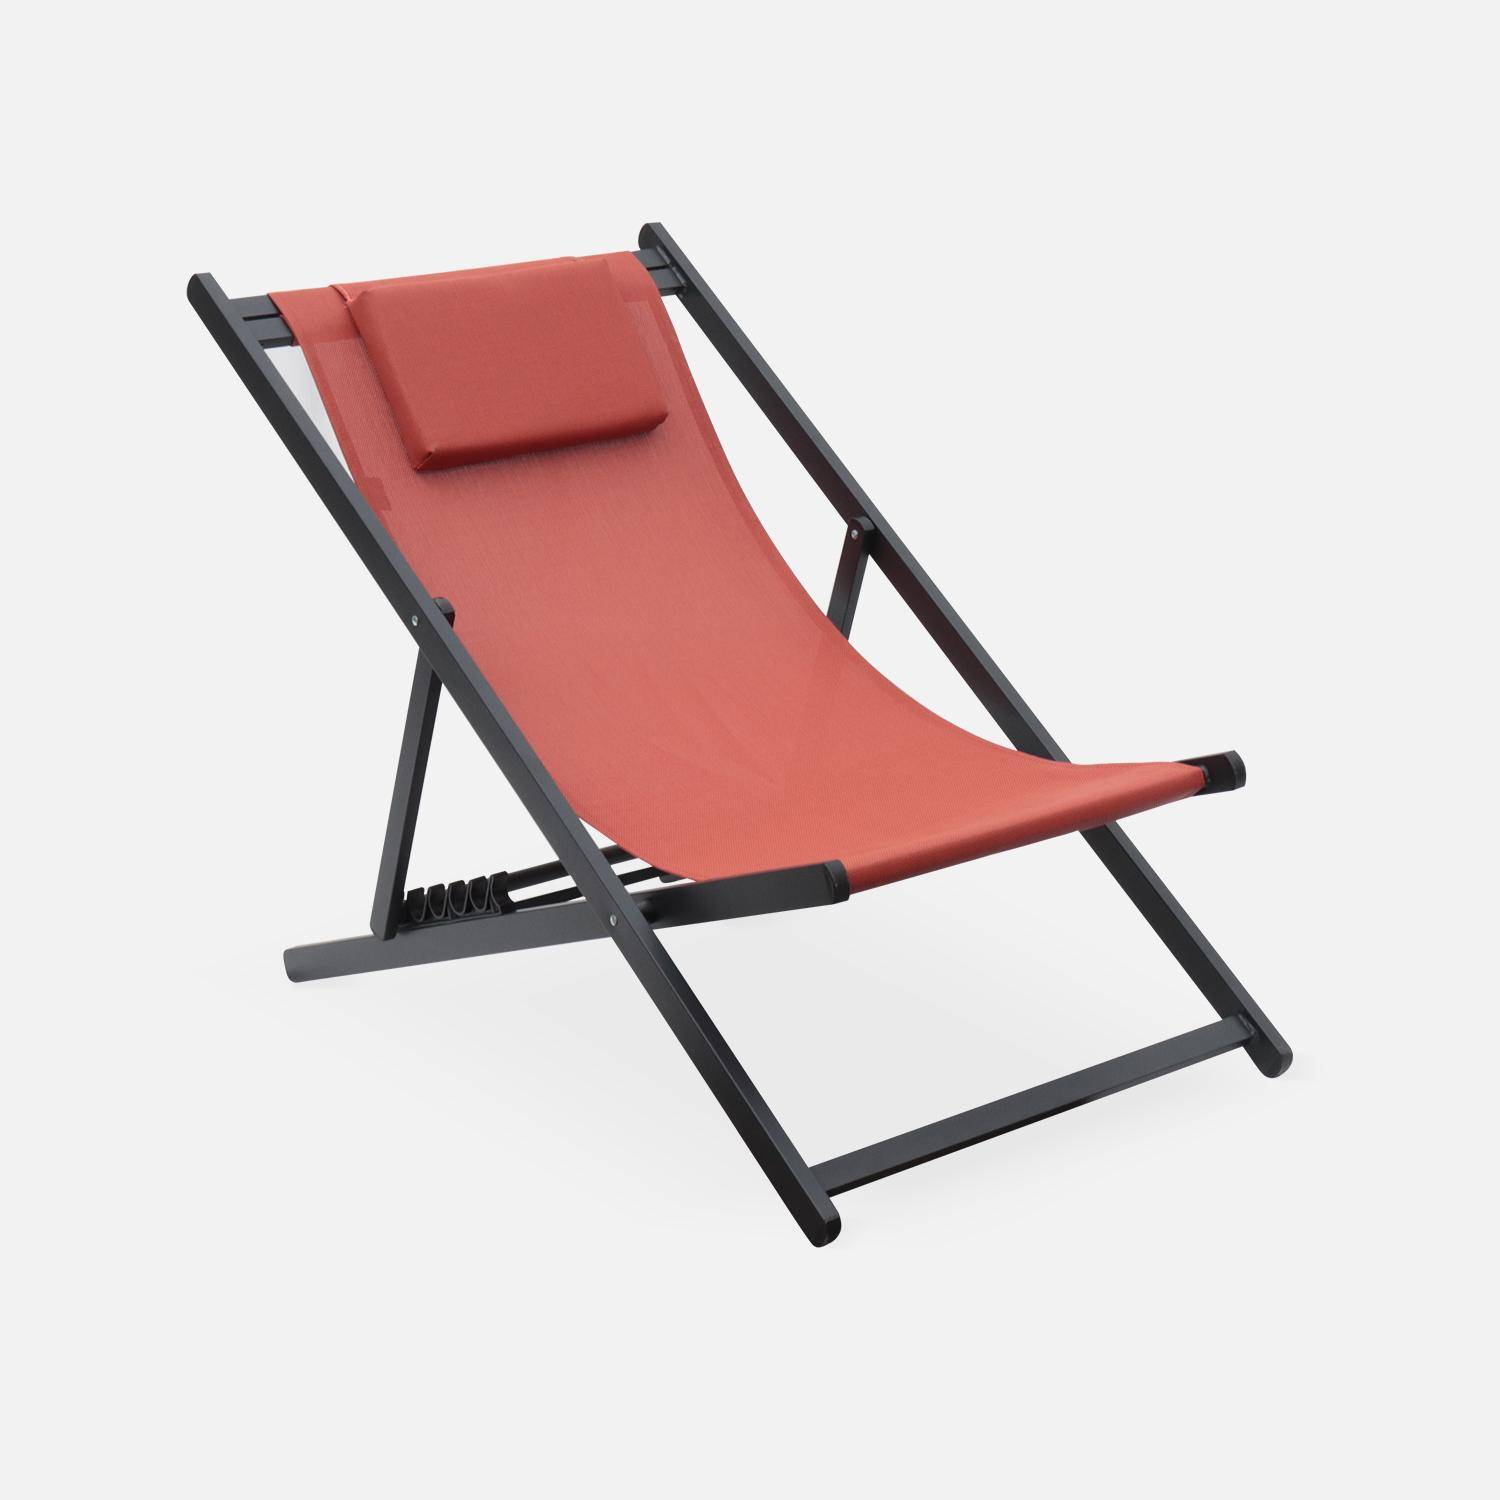 Set of 2 sun loungers - adjustable deck chairs with headrests made from aluminium frame - Gaia - Anthracite frame, Terracotta textilene,sweeek,Photo3